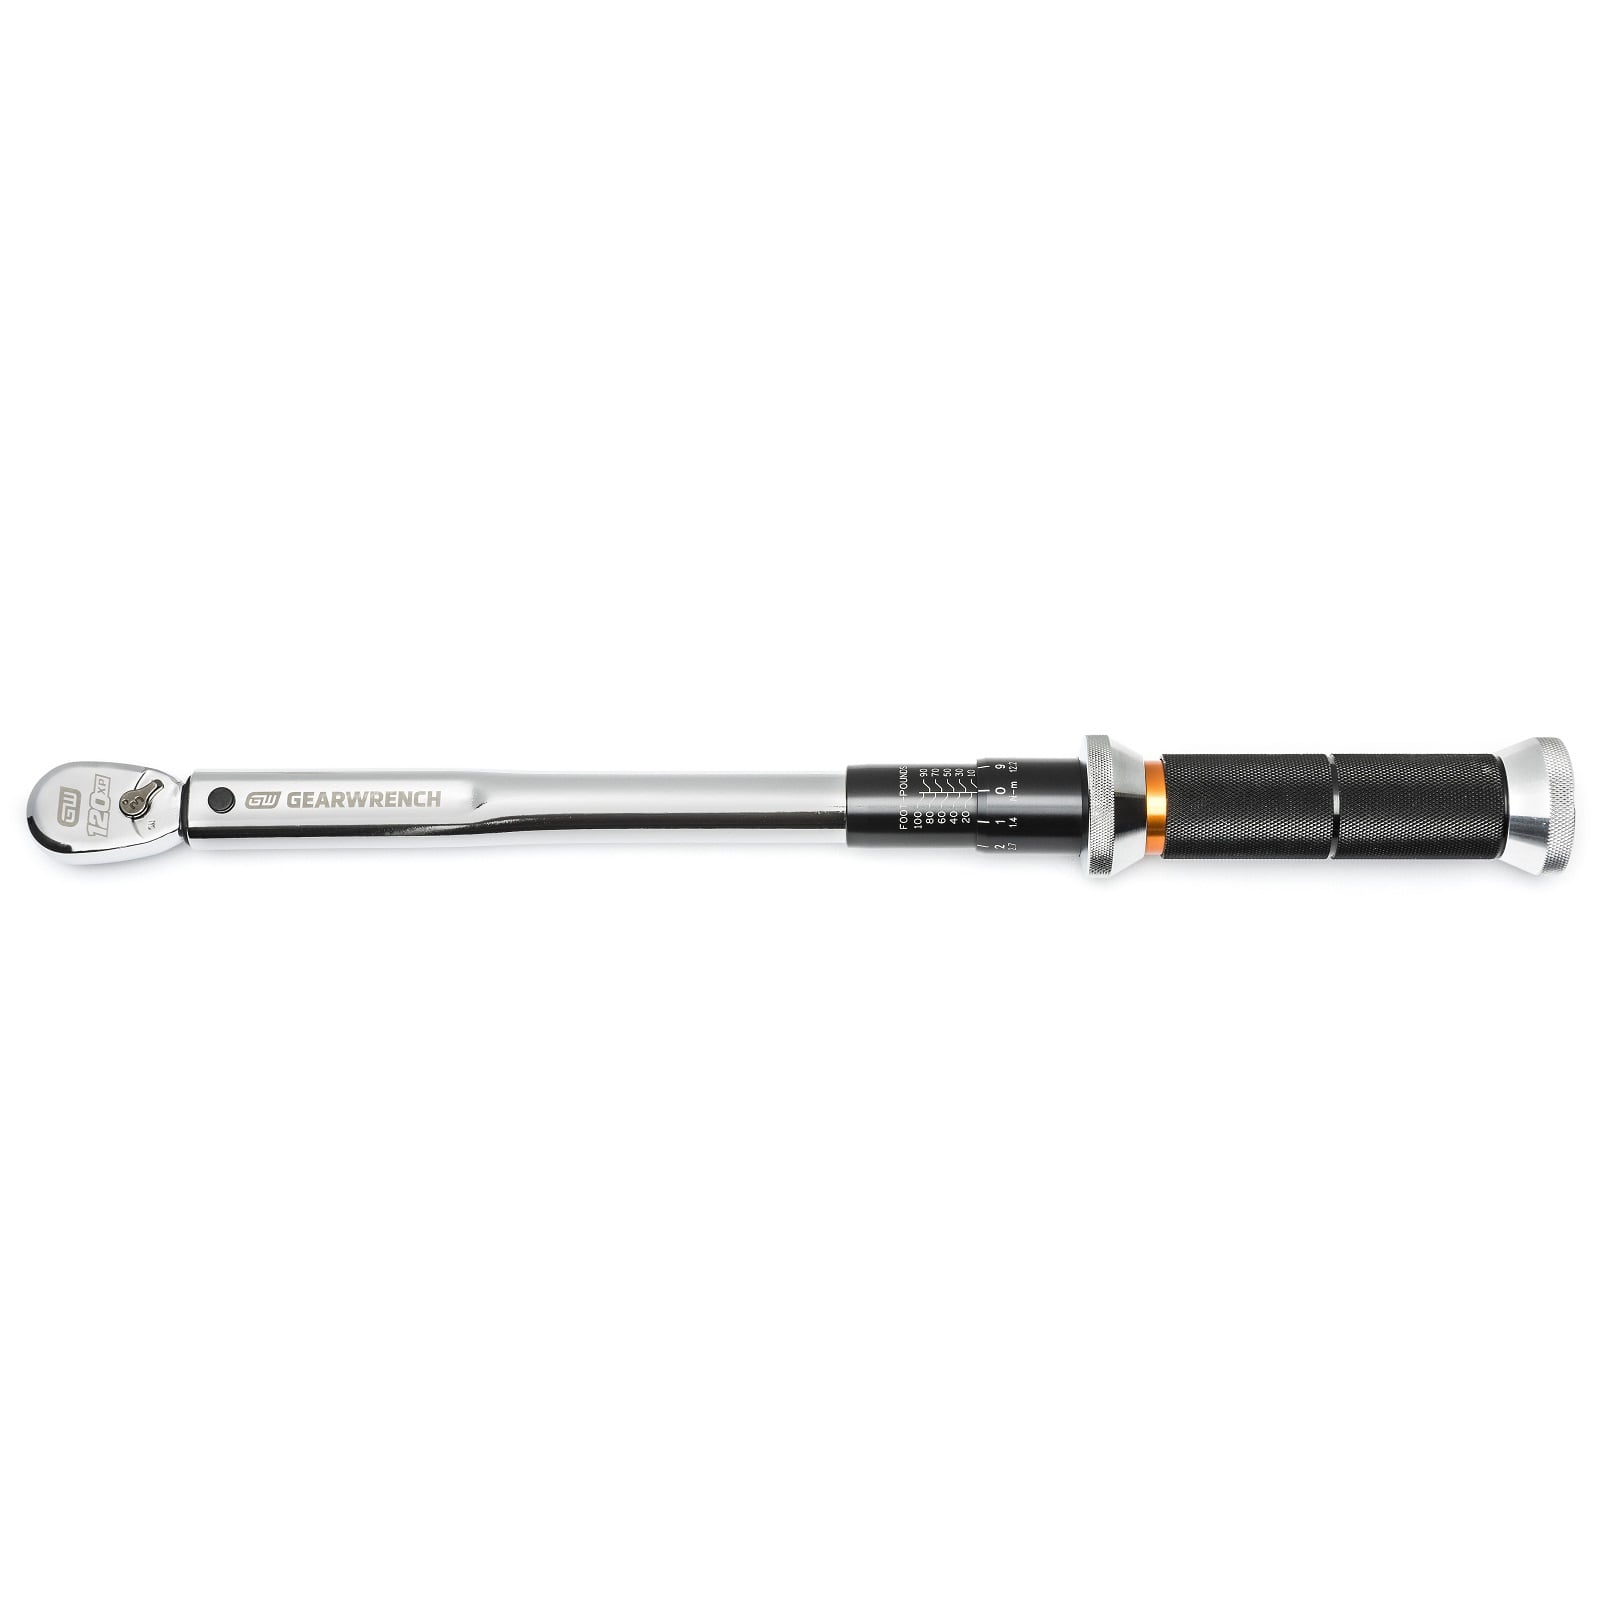 GEARWRENCH 85176 3/8″ Square Drive 120XP™ Micrometer Torque Wrench 13.55Nm  – 135.5Nm (10-100Ft/Lbs) 120XP™, GEARWRENCH Catalogue, New Products, Sale  Items, Torque Wrenches, Torque Wrenches Discount Trader